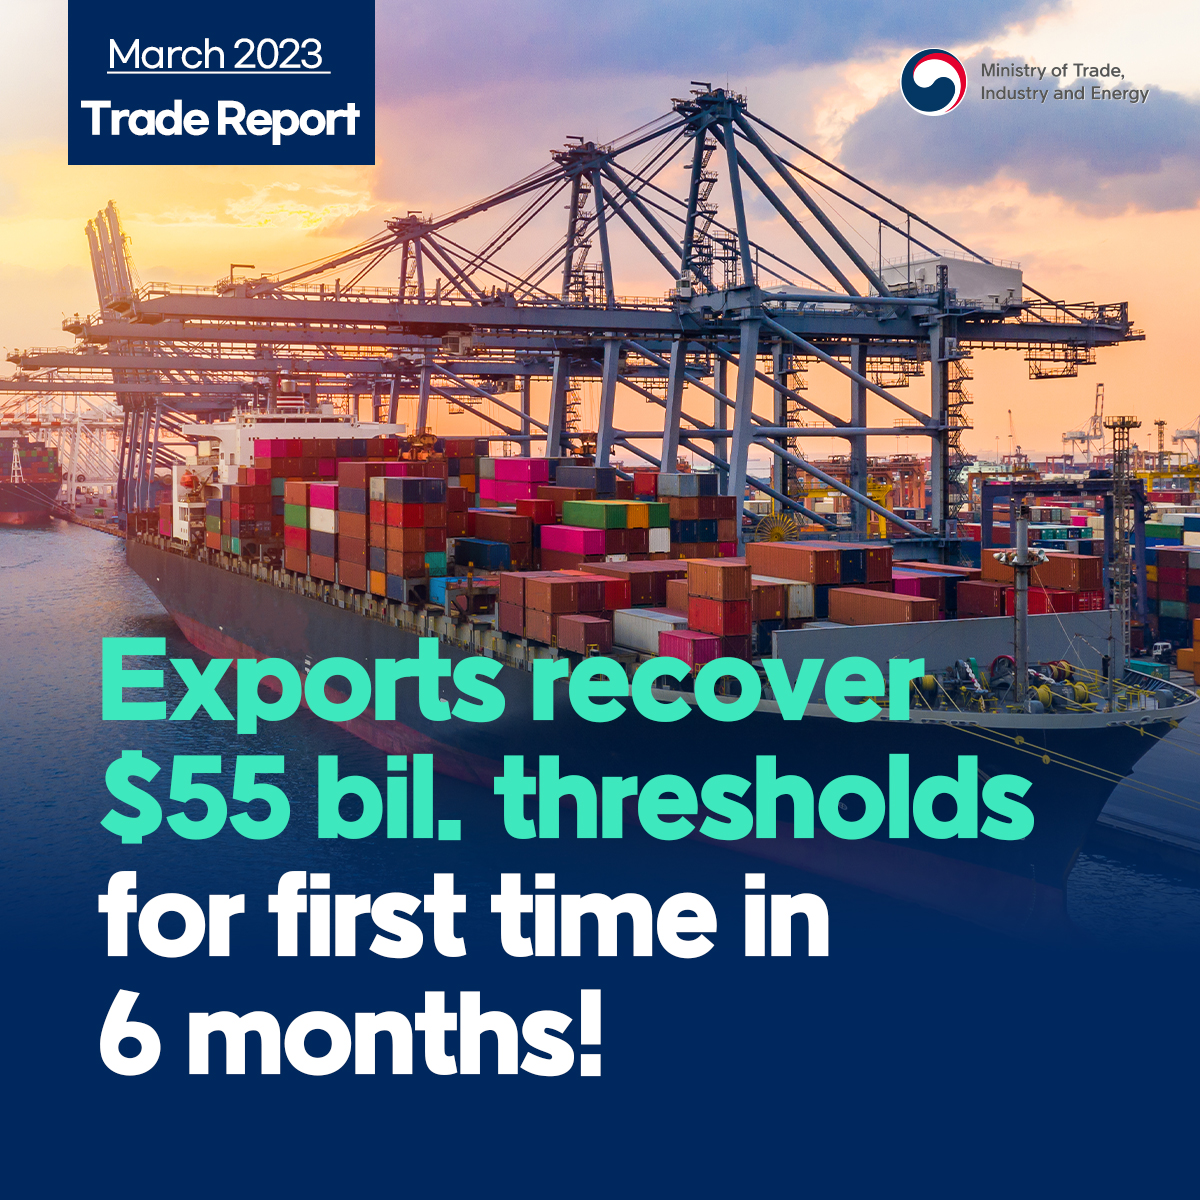 Korea's exports recover $55 billion thresholds in March! Image 0